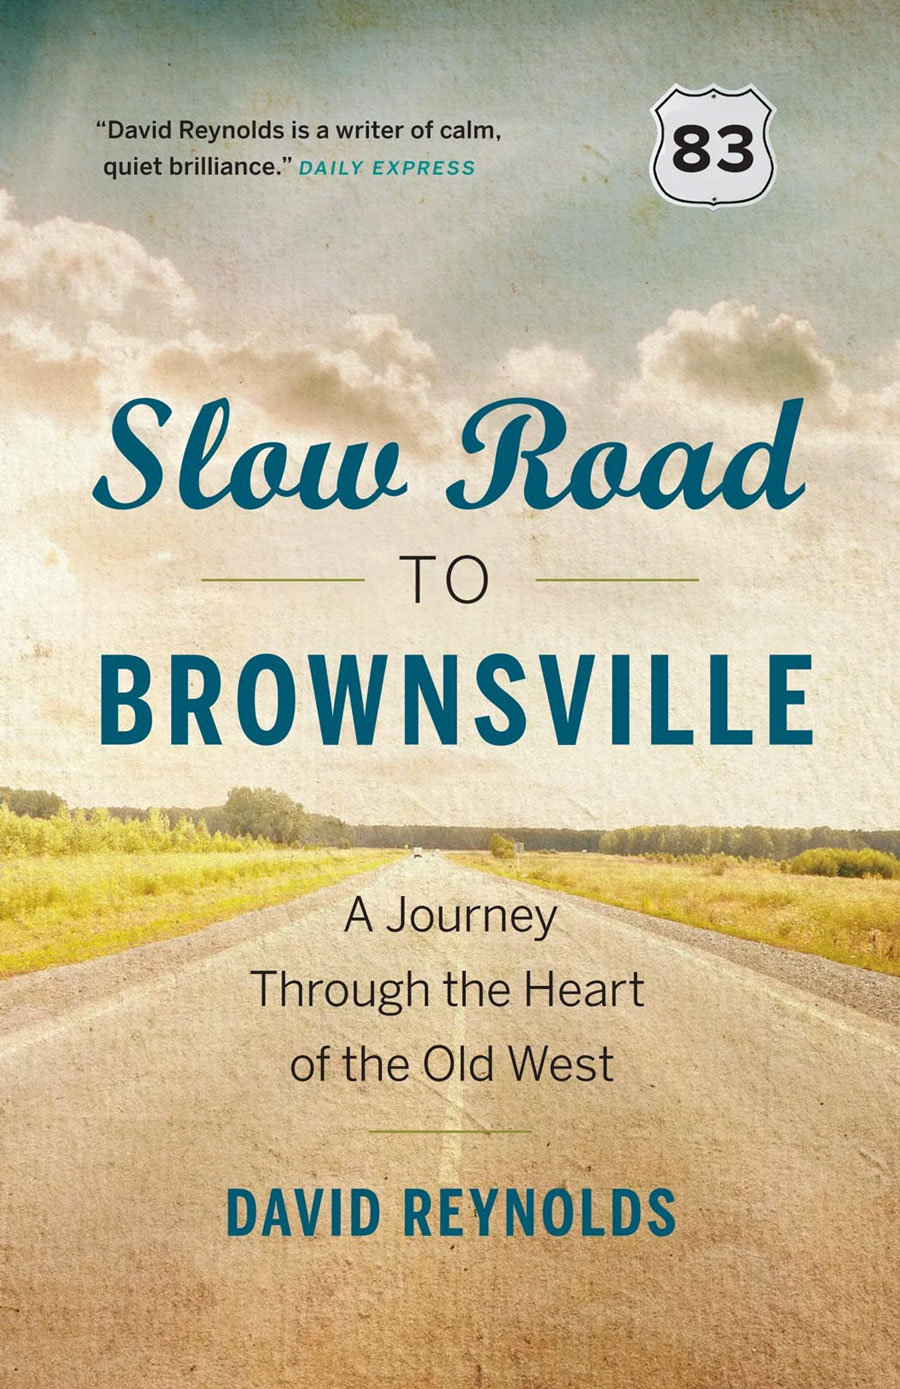 Slow Road to Brownsville